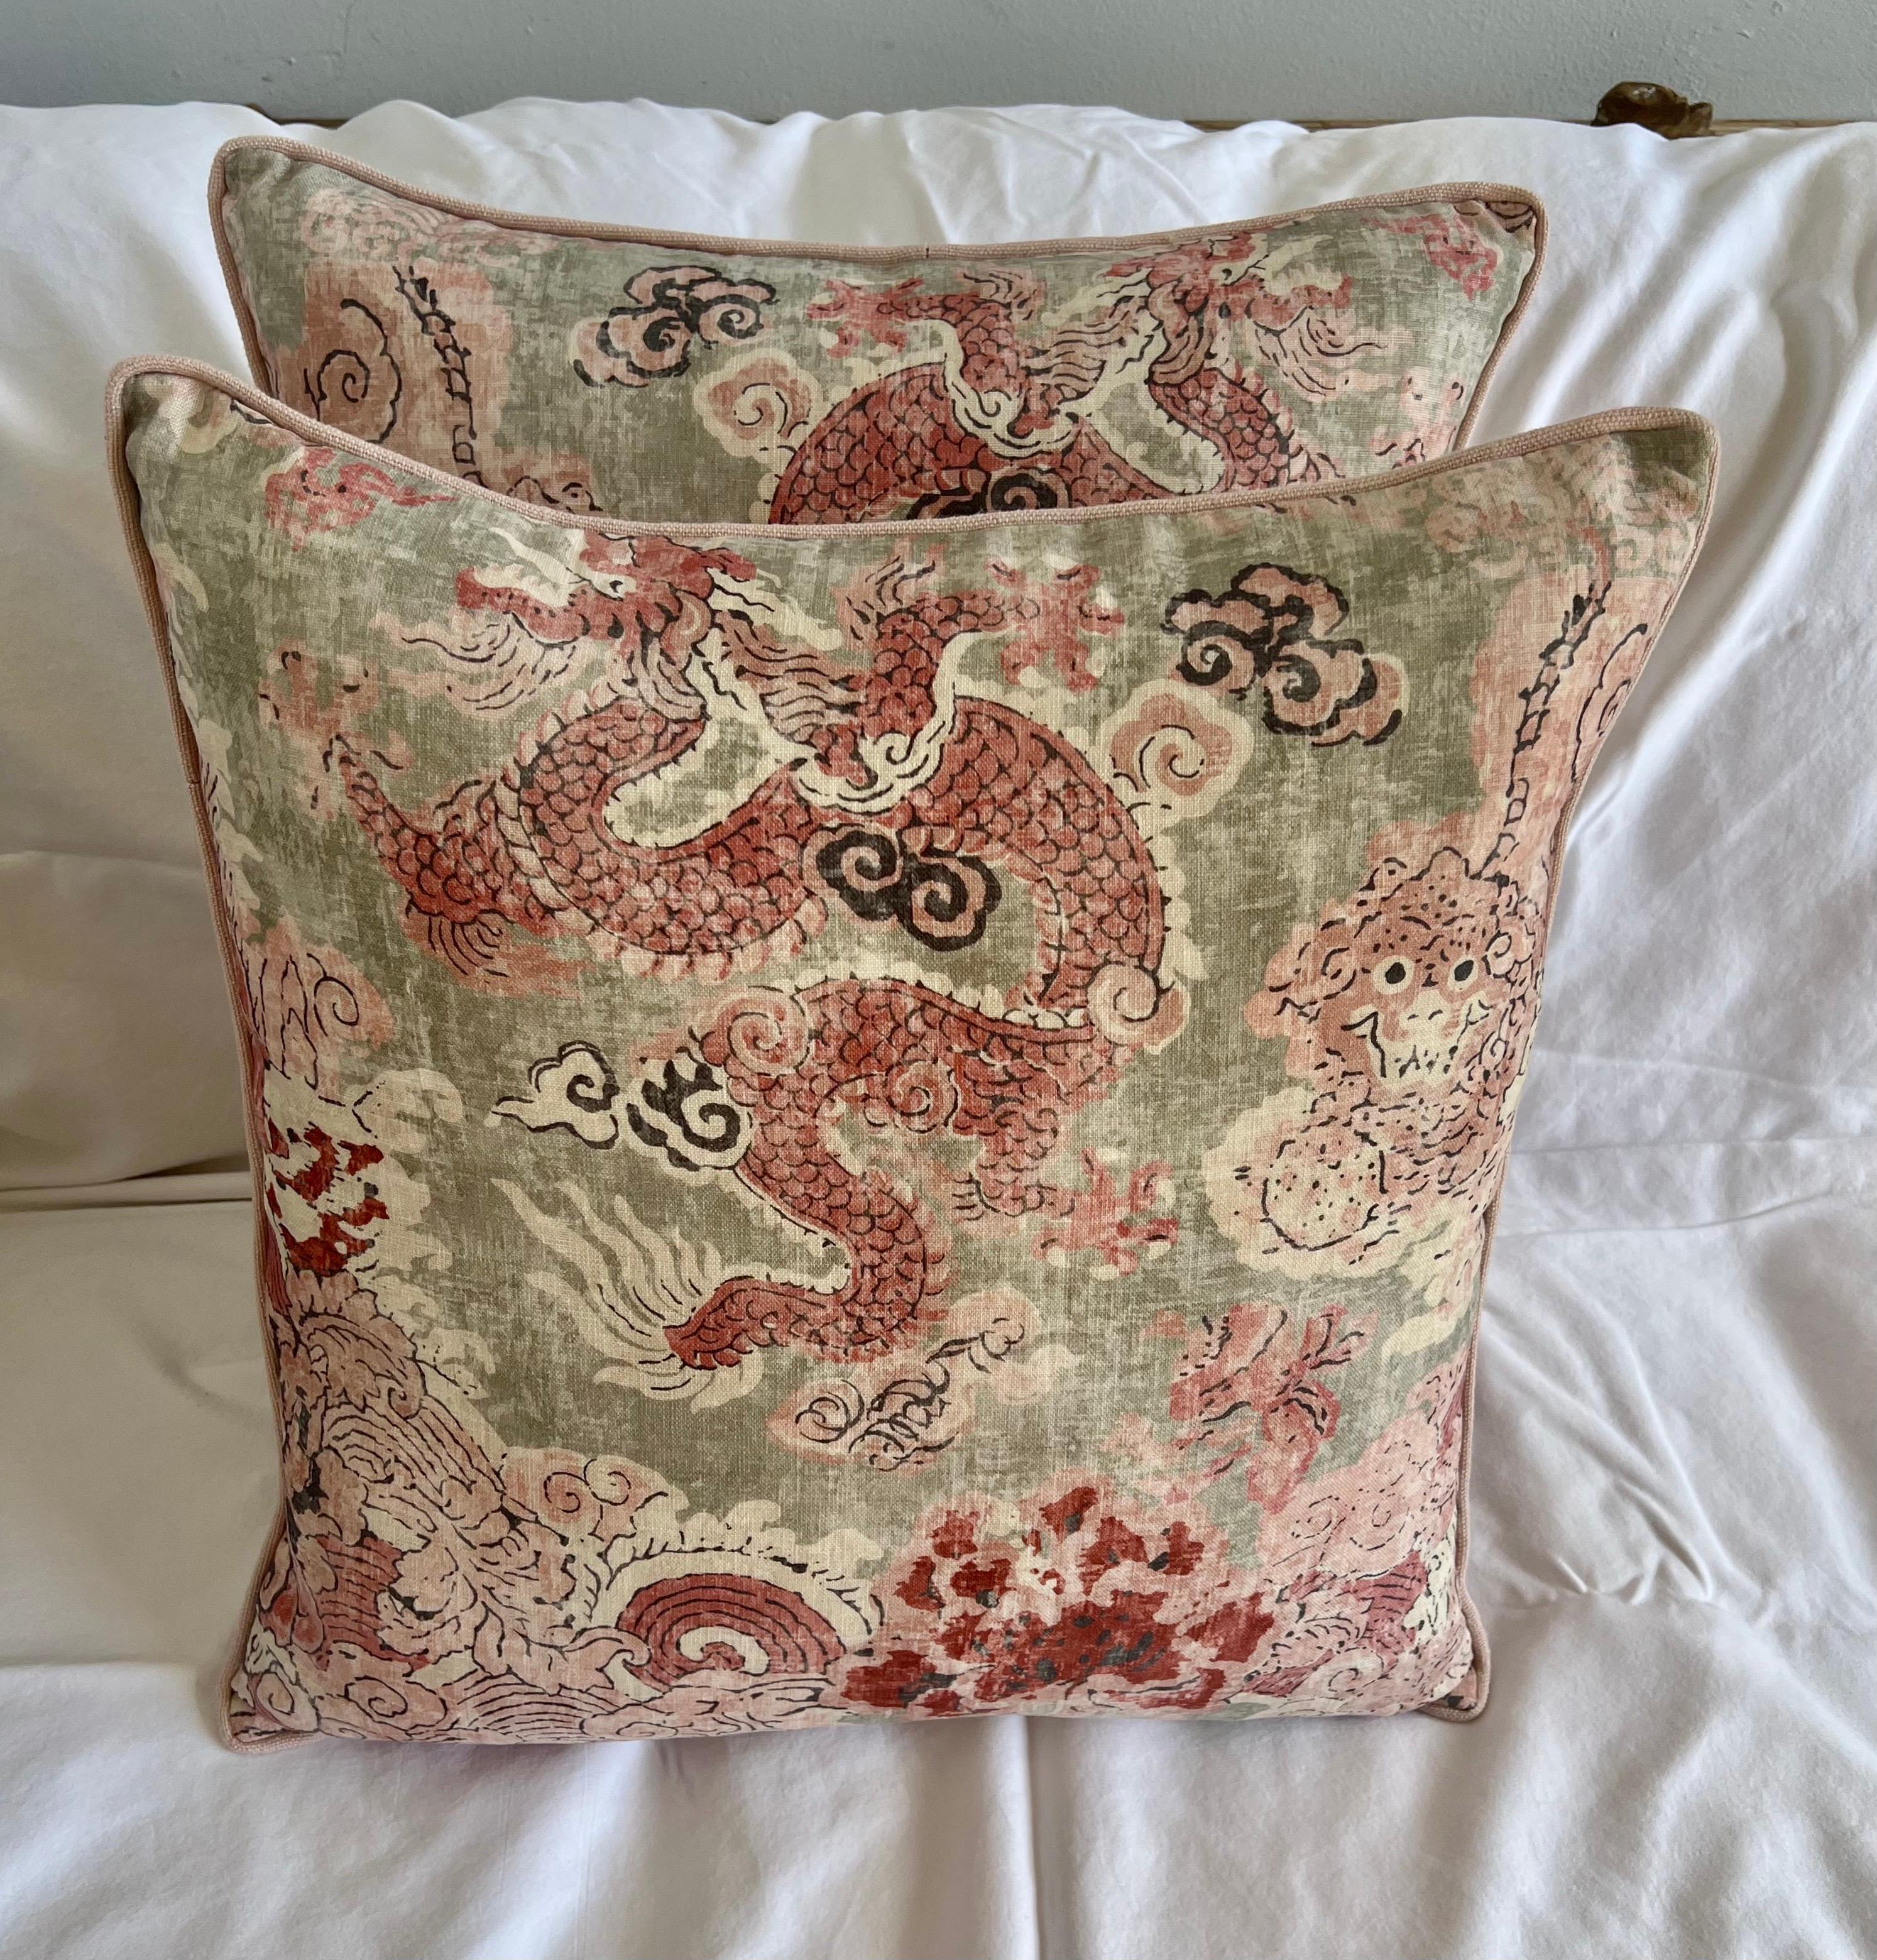 Pair of custom pillows made with printed cotton Chinoiserie style fabric depicting dragons and other mythological creatures. Linen backs, down inserts.